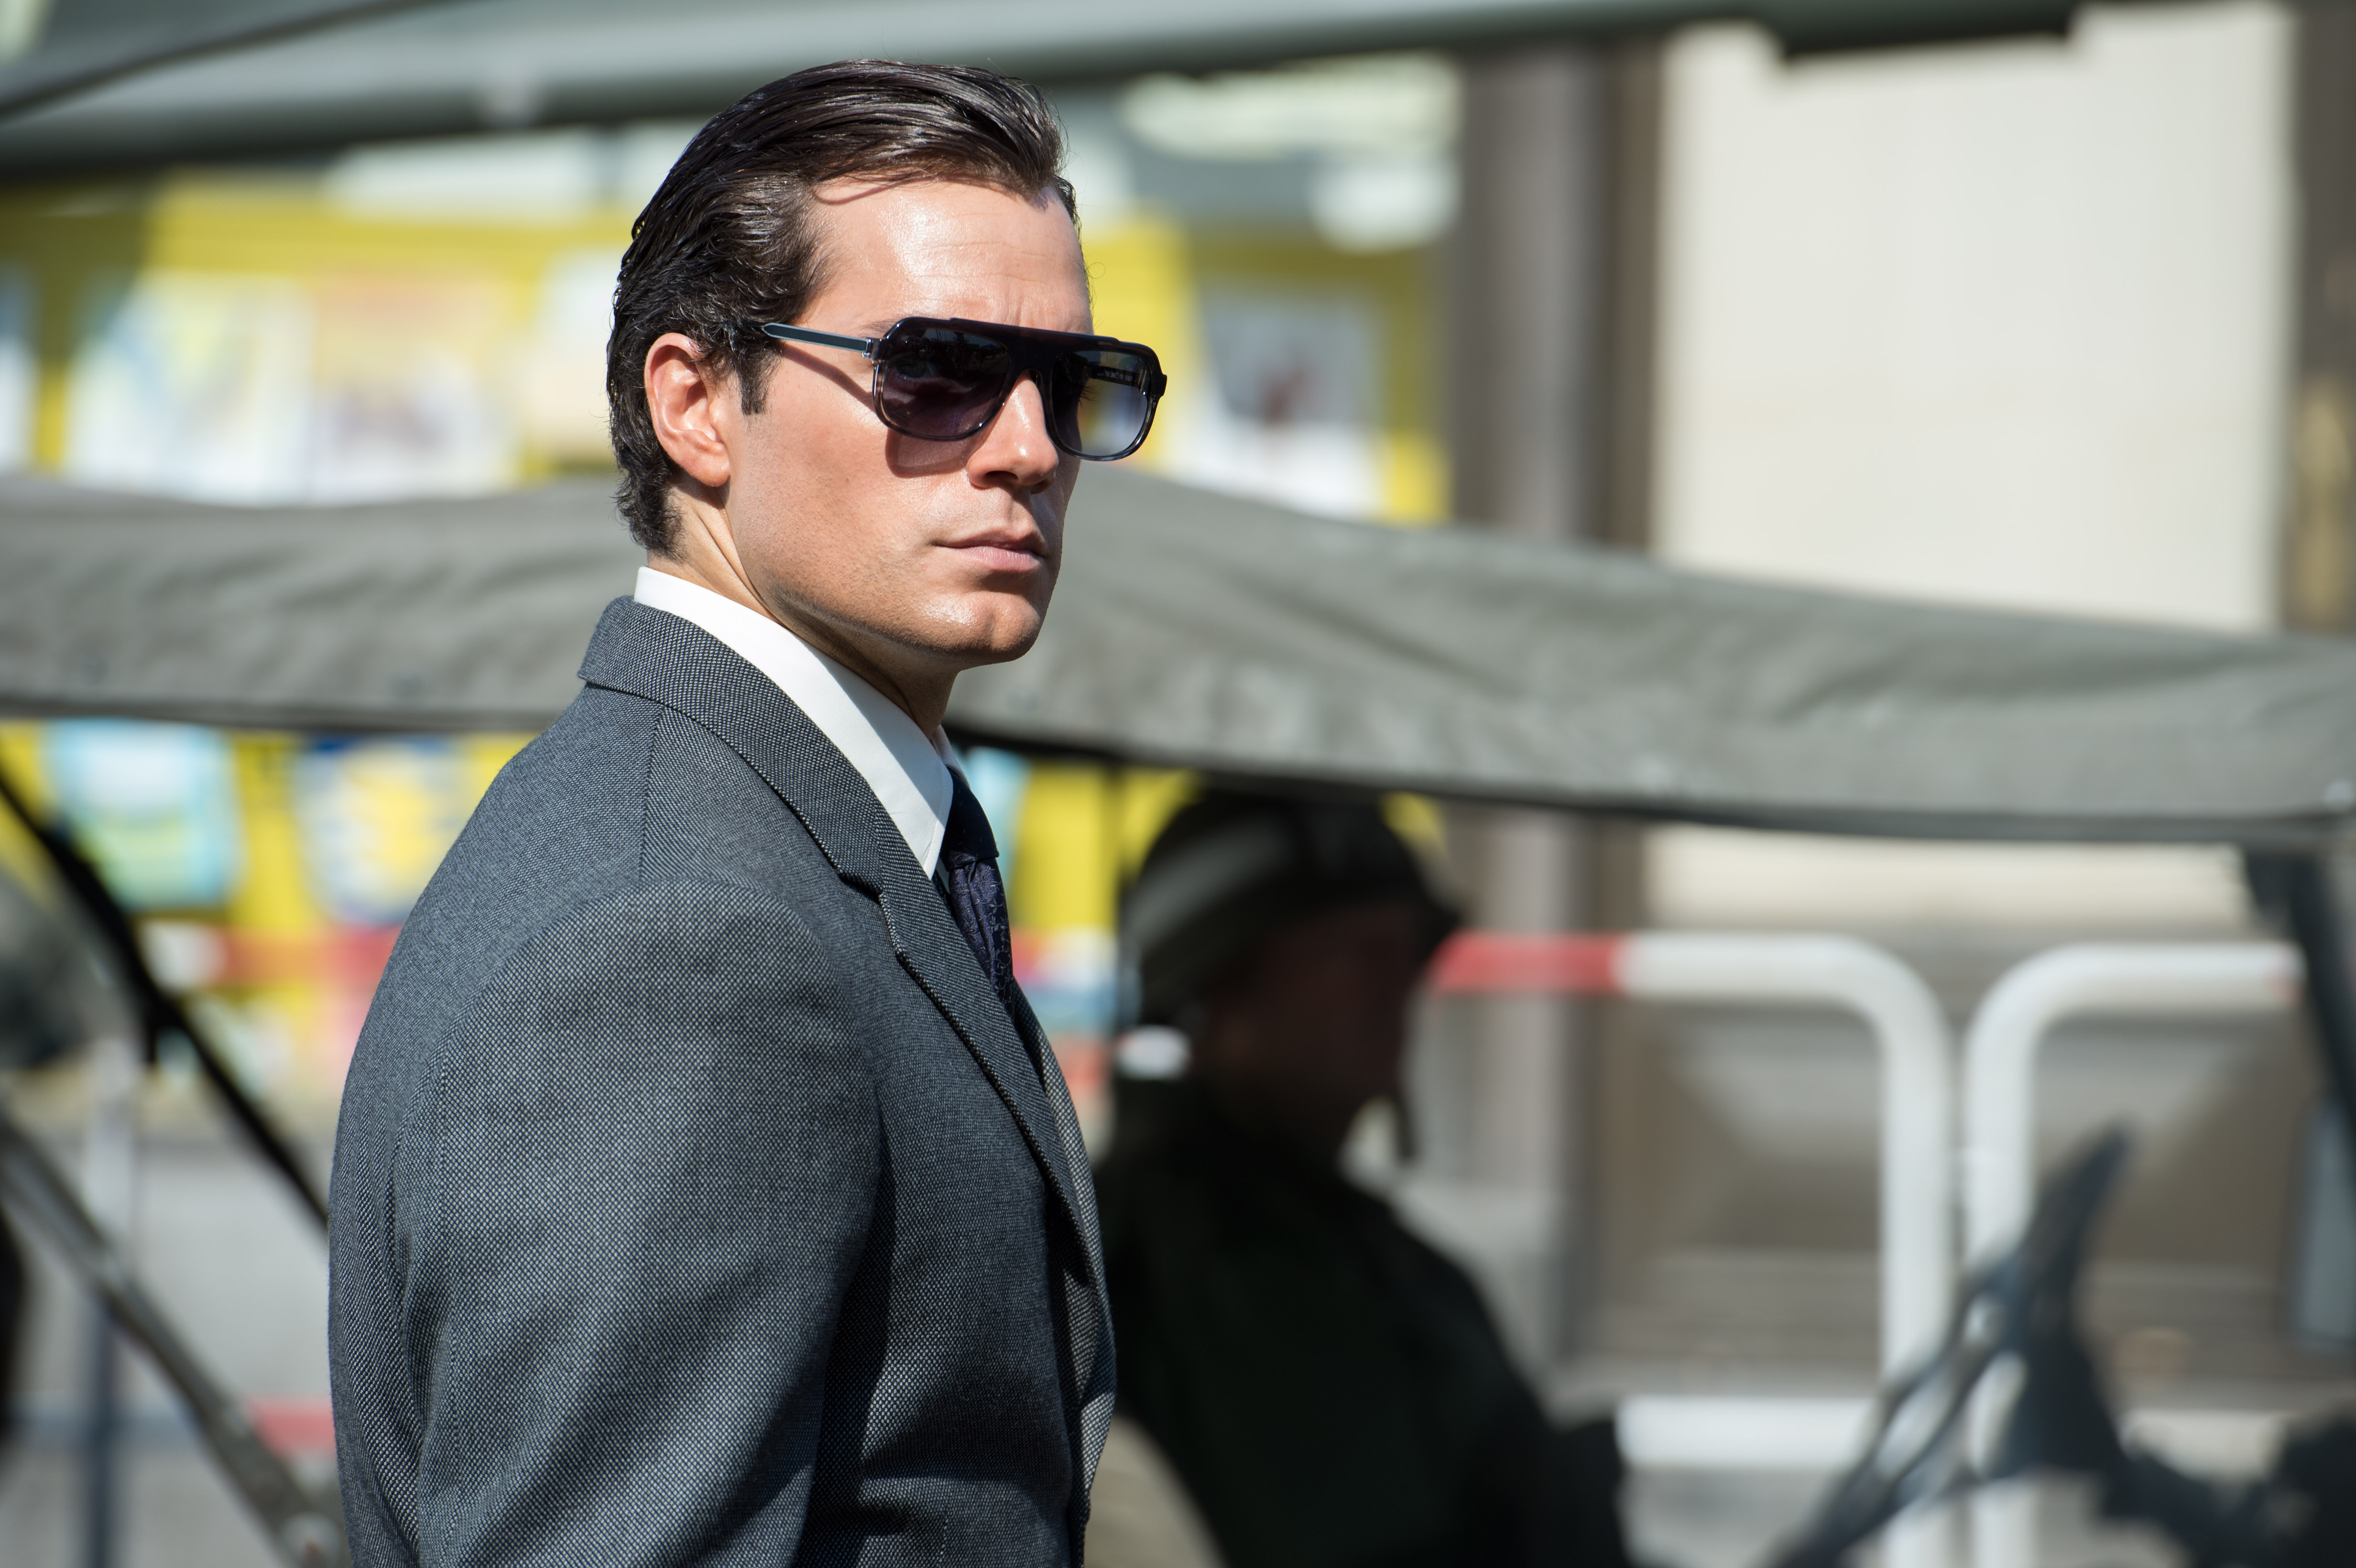 Henry Cavill Napoleon Solo The Man From U N C L E 4928x3280